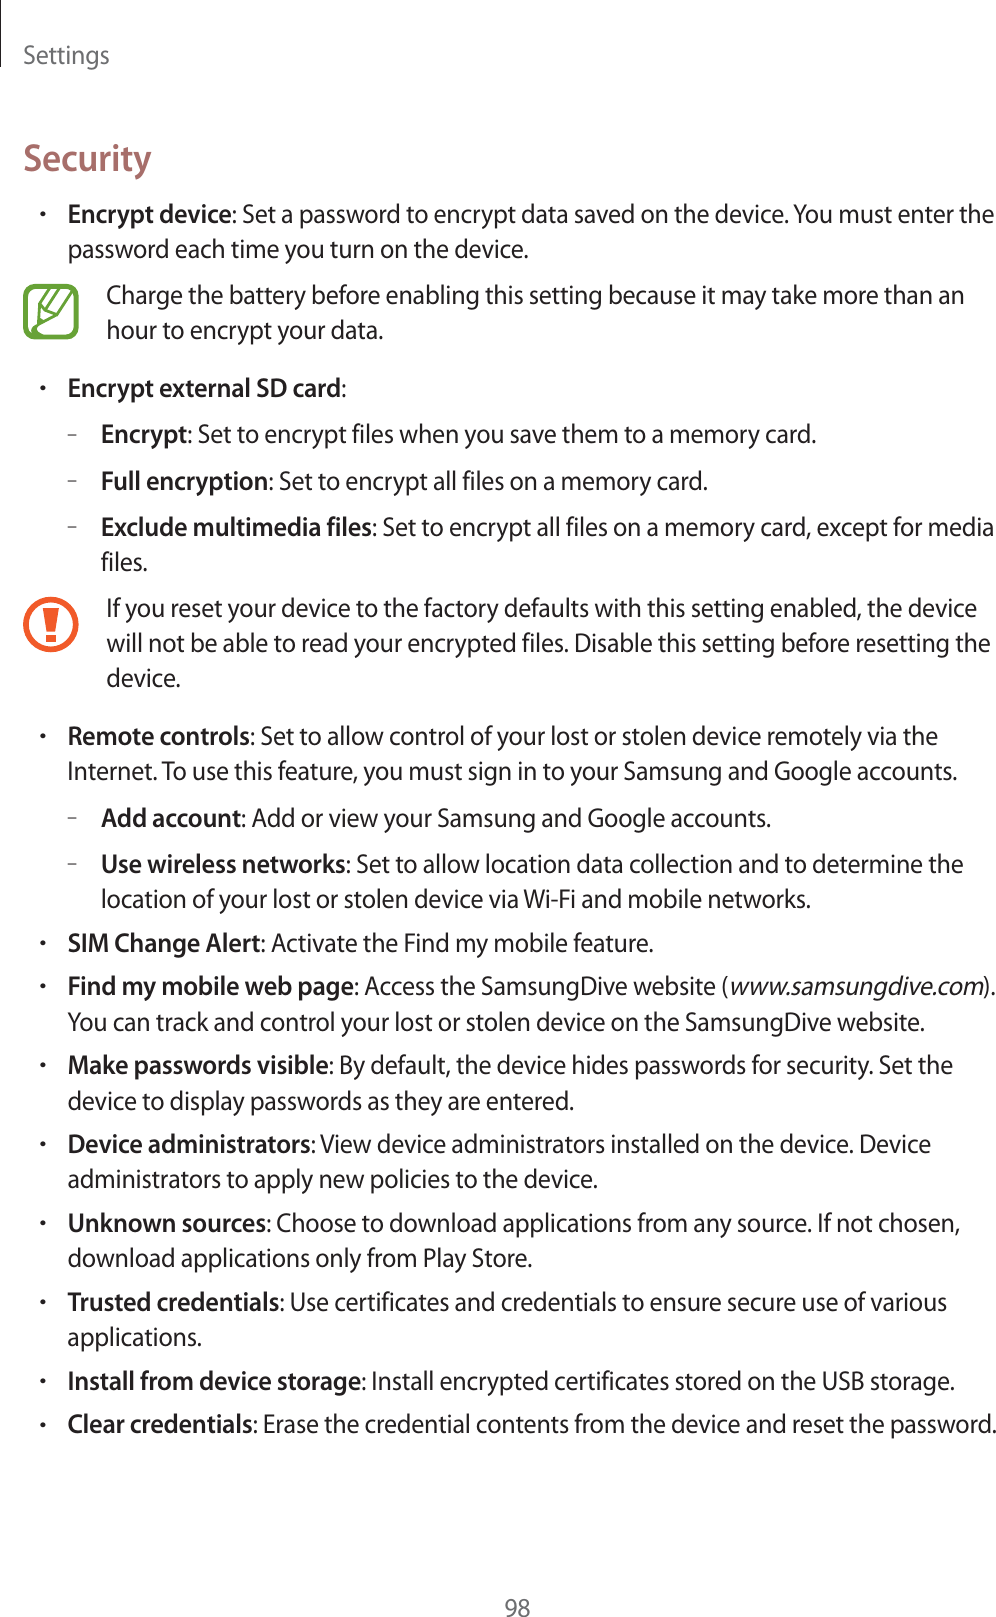 Settings98SecurityrEncrypt device: Set a password to encrypt data saved on the device. You must enter the password each time you turn on the device.Charge the battery before enabling this setting because it may take more than an hour to encrypt your data.rEncrypt external SD card:–Encrypt: Set to encrypt files when you save them to a memory card.–Full encryption: Set to encrypt all files on a memory card.–Exclude multimedia files: Set to encrypt all files on a memory card, except for media files.If you reset your device to the factory defaults with this setting enabled, the device will not be able to read your encrypted files. Disable this setting before resetting the device.rRemote controls: Set to allow control of your lost or stolen device remotely via the Internet. To use this feature, you must sign in to your Samsung and Google accounts.–Add account: Add or view your Samsung and Google accounts.–Use wireless networks: Set to allow location data collection and to determine the location of your lost or stolen device via Wi-Fi and mobile networks.rSIM Change Alert: Activate the Find my mobile feature.rFind my mobile web page: Access the SamsungDive website (www.samsungdive.com). You can track and control your lost or stolen device on the SamsungDive website.rMake passwords visible: By default, the device hides passwords for security. Set the device to display passwords as they are entered.rDevice administrators: View device administrators installed on the device. Device administrators to apply new policies to the device.rUnknown sources: Choose to download applications from any source. If not chosen, download applications only from Play Store.rTrusted credentials: Use certificates and credentials to ensure secure use of various applications.rInstall from device storage: Install encrypted certificates stored on the USB storage.rClear credentials: Erase the credential contents from the device and reset the password.